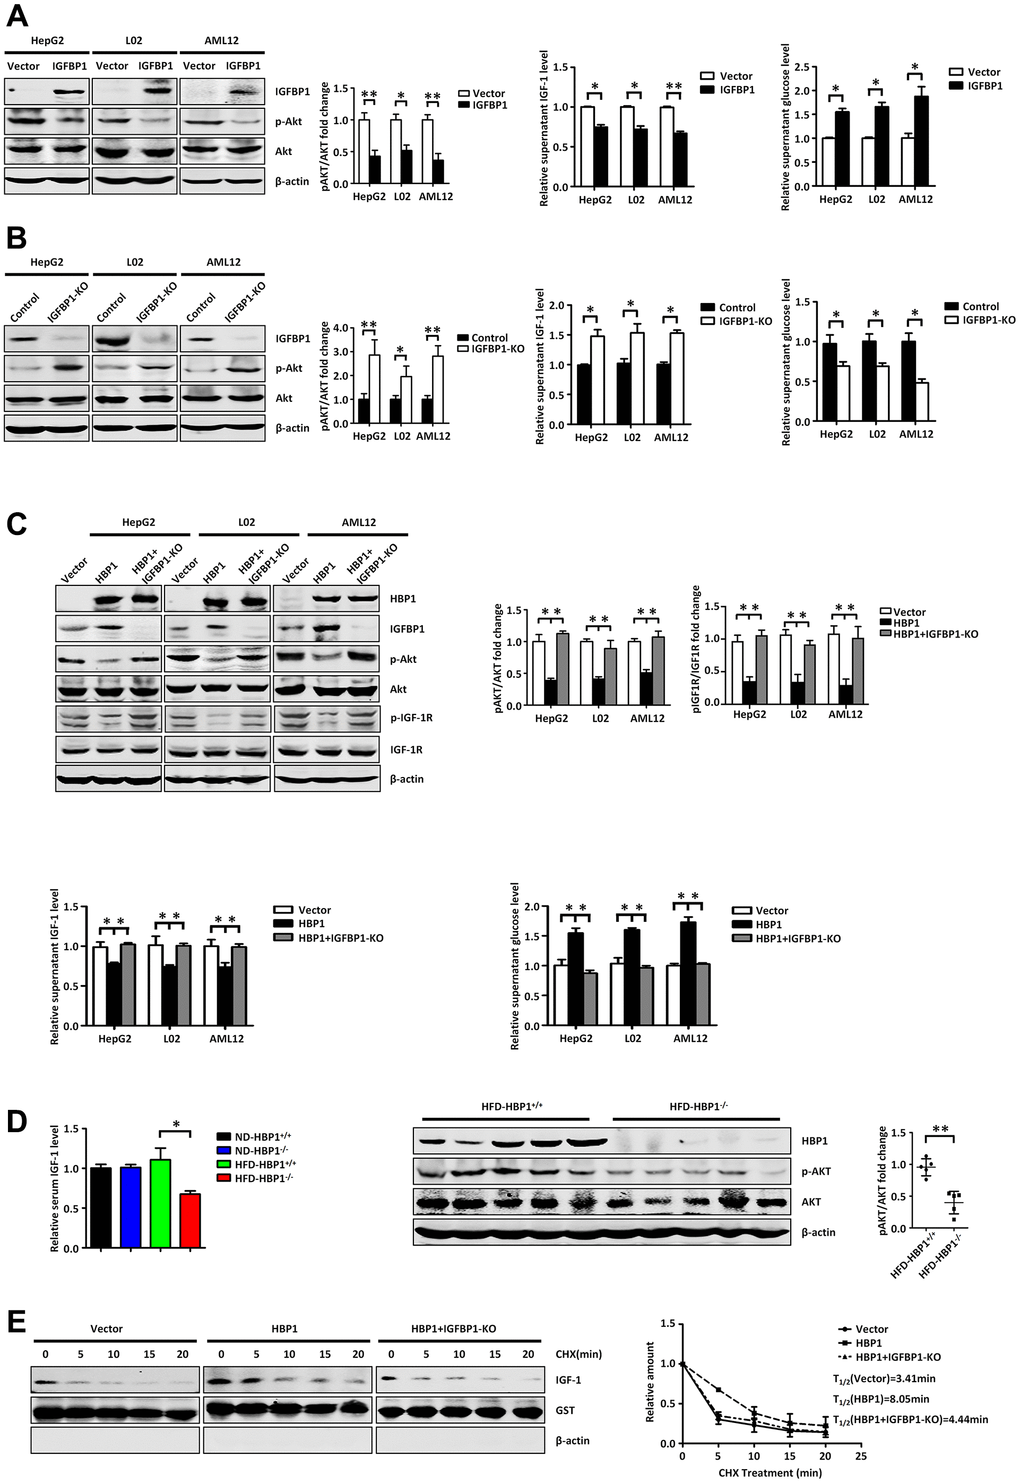 The HBP1-IGFBP1 axis increases extracellular glucose concentration by reducing activation of the PI3K-AKT signaling pathway. (A) IGFBP1 inhibits p-AKT signaling pathway, inhibits supernatant IGF-1 levels and elevates supernatant glucose level. The protein levels of IGFBP1, p-AKT and AKT were measured by western blotting in HepG2, L02 and AML12 cells. β-actin was used as a loading control. The content of IGF-1 in supernatant was measured by ELISA kit. The supernatant was changed from DMEM to EBSS and was collected after 24 hours. Then the supernatant glucose level was measured by glucose testing kit. (B) IGFBP1 knockout activates p-AKT signaling pathway, increases supernatant IGF-1 levels and suppresses supernatant glucose level. The protein levels of IGFBP1, p-AKT and AKT were measured by western blotting in IGFBP1-knockout HepG2, L02 and AML12 cells constructed by CRISPR/Cas 9 system. β-actin was used as a loading control. The content of IGF-1 in supernatant was measured by ELISA kit. The supernatant was changed from DMEM to EBSS and was collected after 24 hours. Then the supernatant glucose level was measured by glucose testing kit. (C) HBP1 can inhibit p-AKT signaling pathway, decreases supernatant IGF-1 levels and elevates supernatant glucose level by IGFBP1. The protein levels of HBP1, IGFBP1, p-AKT, AKT, p- IGF-1R and IGF-1R were measured by western blotting in HepG2, L02 and AML12 cells. β-actin was used as a loading control. The content of IGF-1 in supernatant was measured by ELISA kit. Then the supernatant was changed from DMEM to EBSS and was collected after 24 hours. The supernatant glucose level was measured by glucose testing kit. (D) The level of serum free IGF-1 in HFD-HBP1−/− mice is lower than that of HFD-HBP1+/+ mice (n=5), so that the PI3K-AKT signaling pathway is inhibits. The content of mice serum IGF-1 was measured by ELISA kit. The protein levels of HBP1, p-AKT and AKT were measured by western blotting. β-actin was used as a loading control. (E) HBP1 affects the stability of IGF-1 through IGFBP1. The protein levels of IGF-1, GST and β-actin were measured by western blotting. GST was used as a loading control. Data were the mean ± SD by a two-tail, unpaired Student’s t-test. *, p